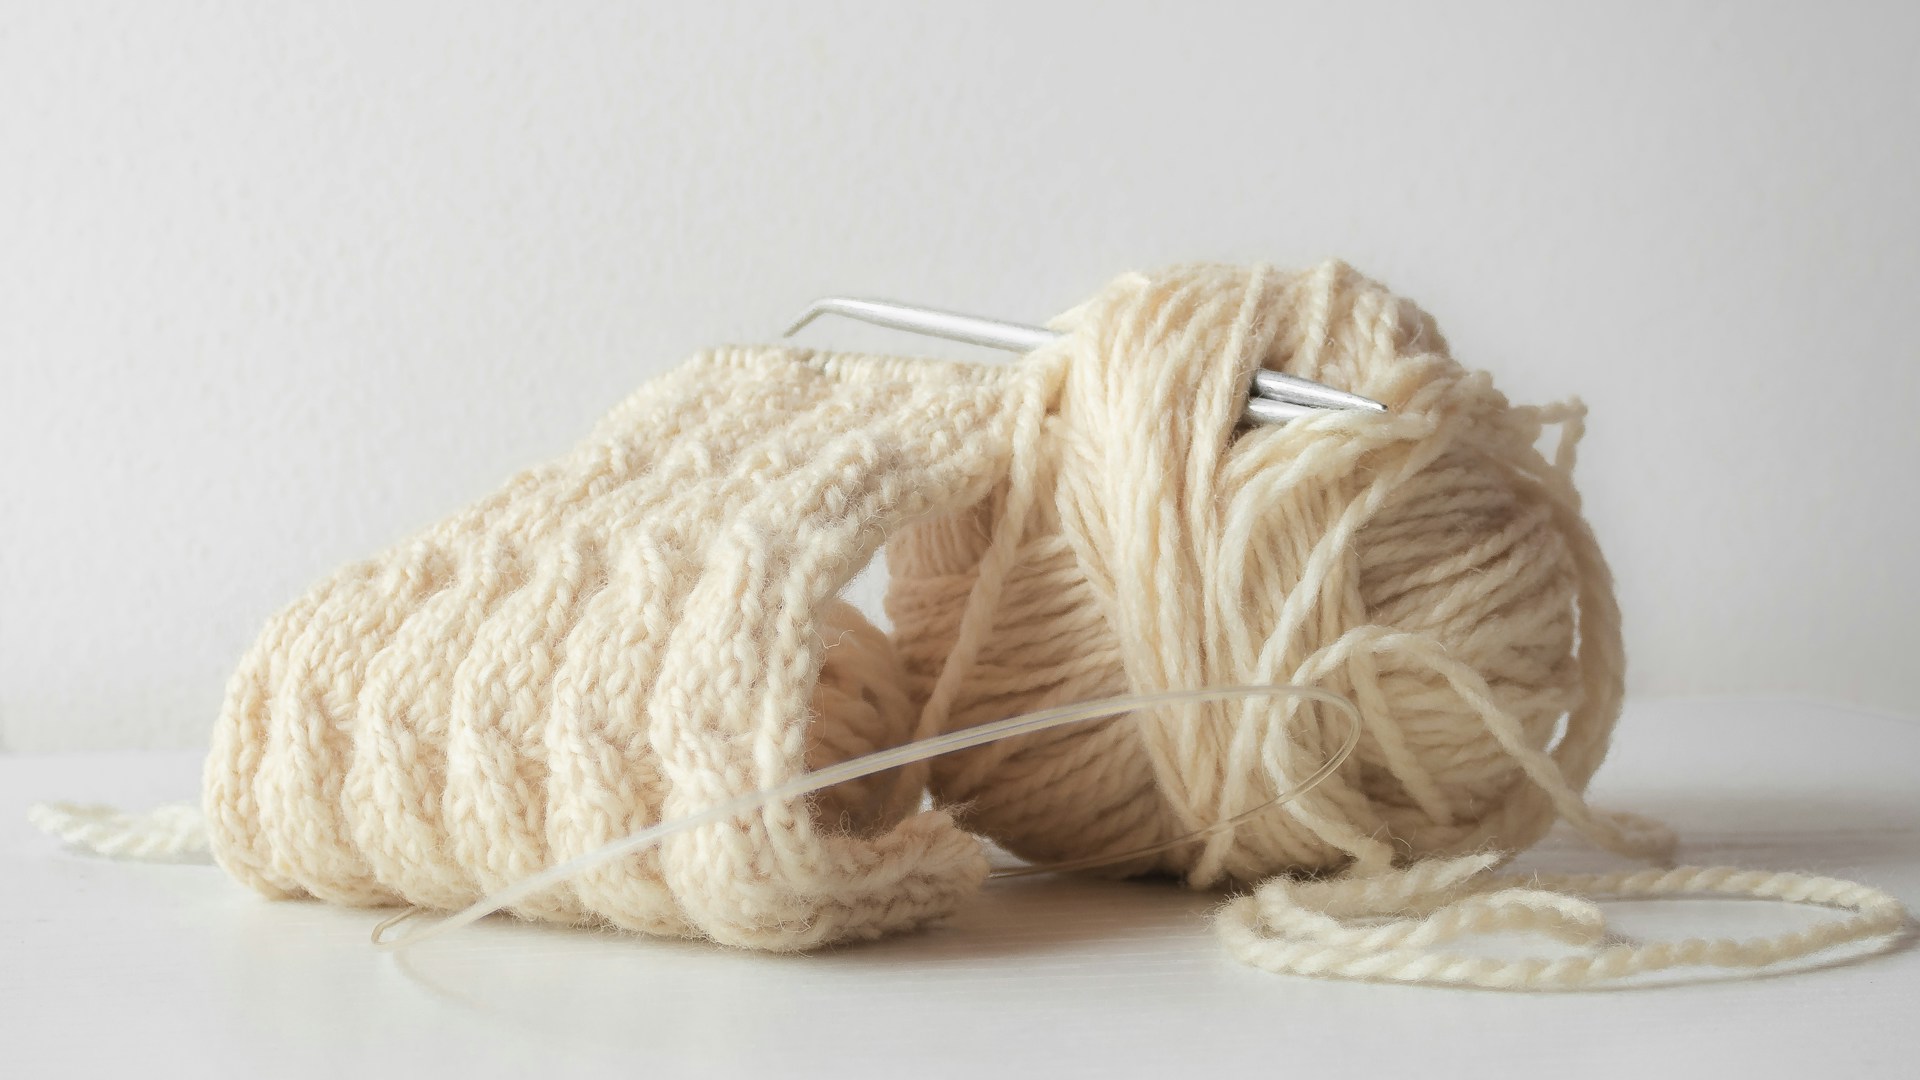 a ball of yarn and a knitting needle on a white surface